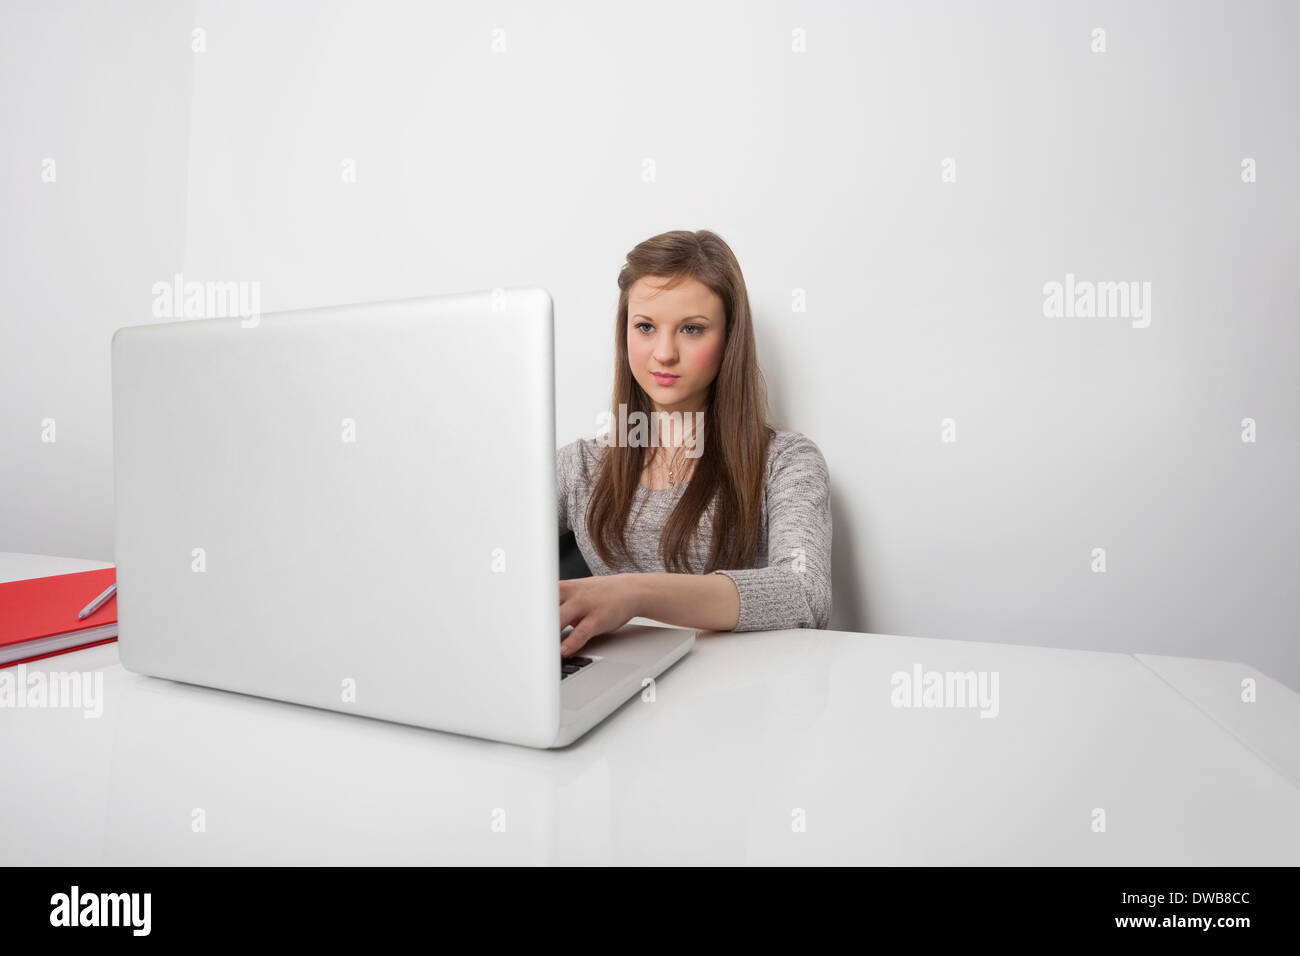 Beautiful businesswoman working on laptop at office desk Stock Photo